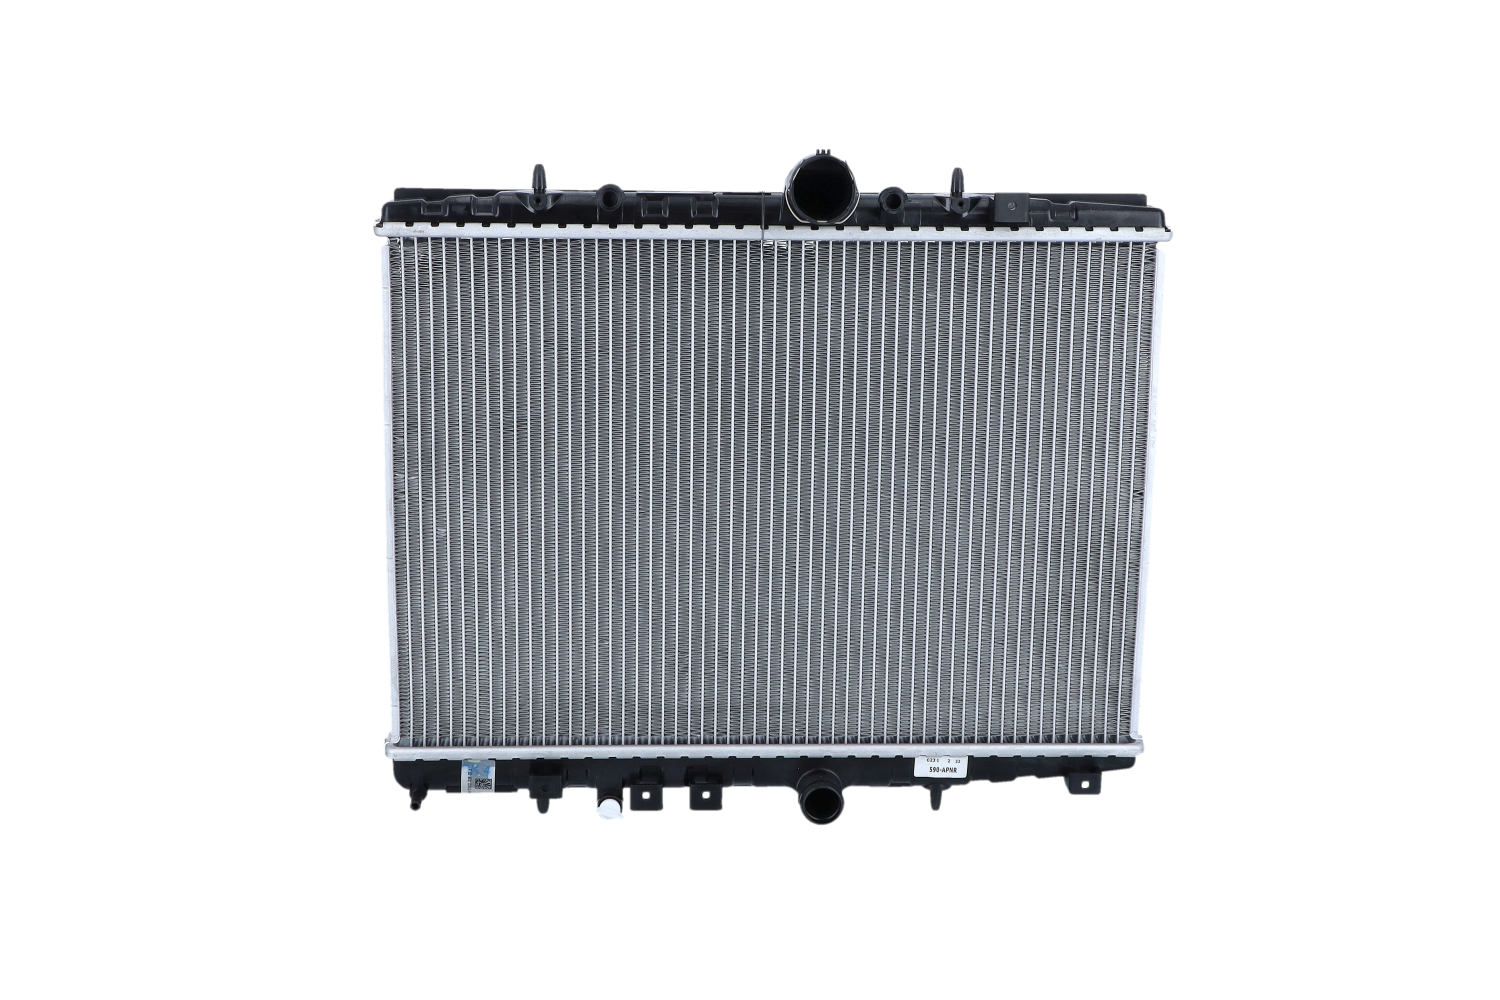 NRF EASY FIT Aluminium, 554 x 380 x 29 mm, with seal ring, Brazed cooling fins Radiator 58303 buy